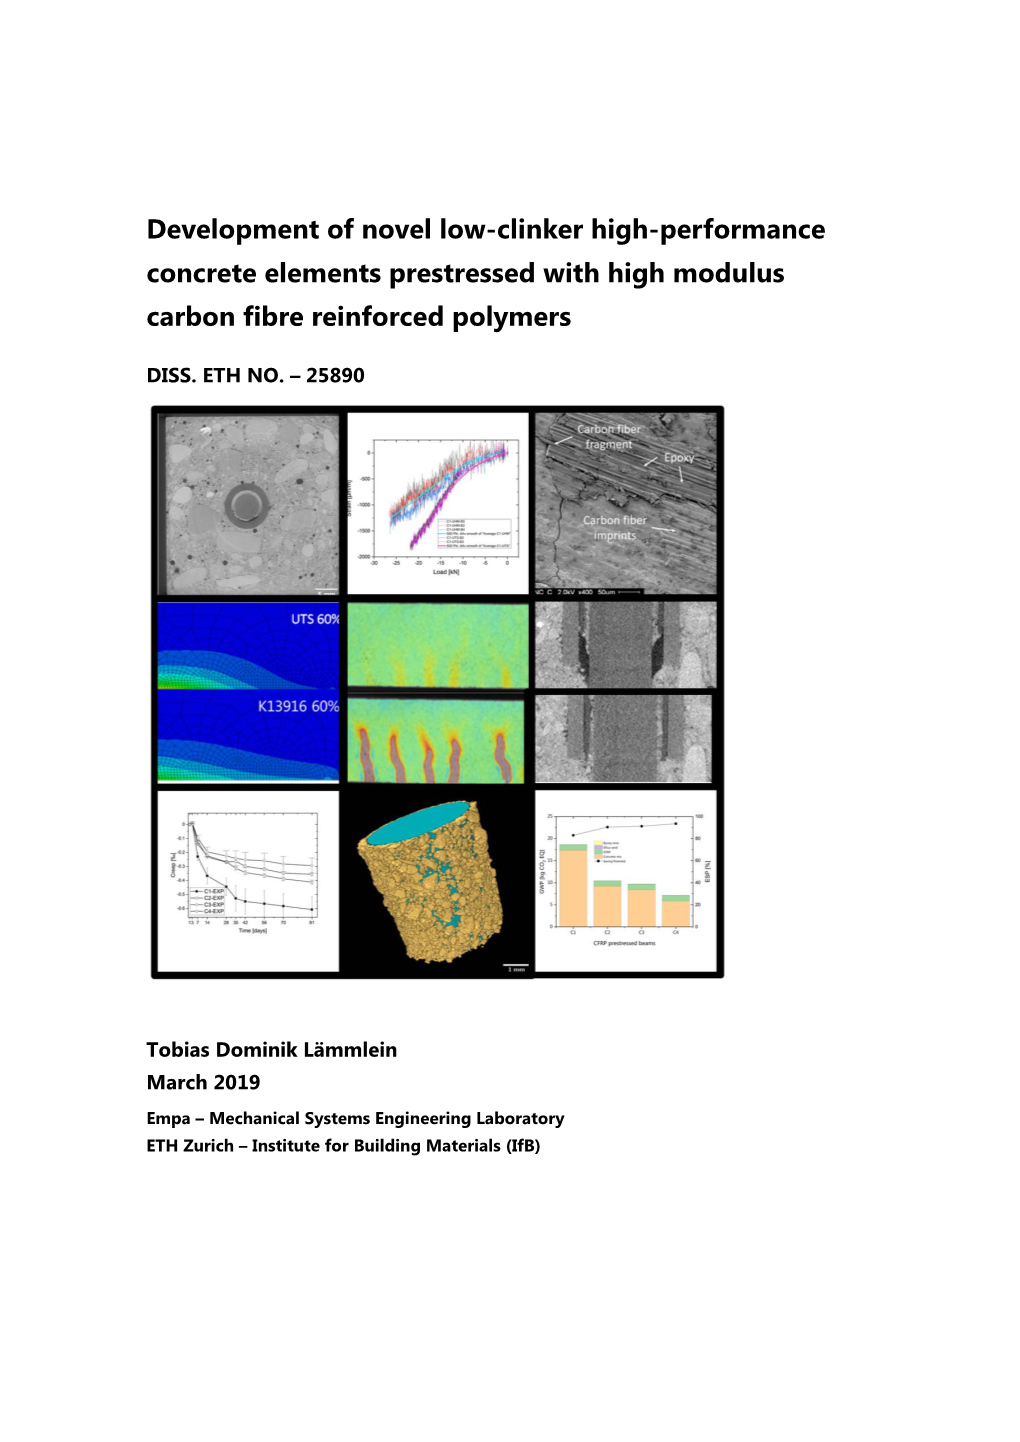 Development of Novel Low-Clinker High-Performance Concrete Elements Prestressed with High Modulus Carbon Fibre Reinforced Polymers